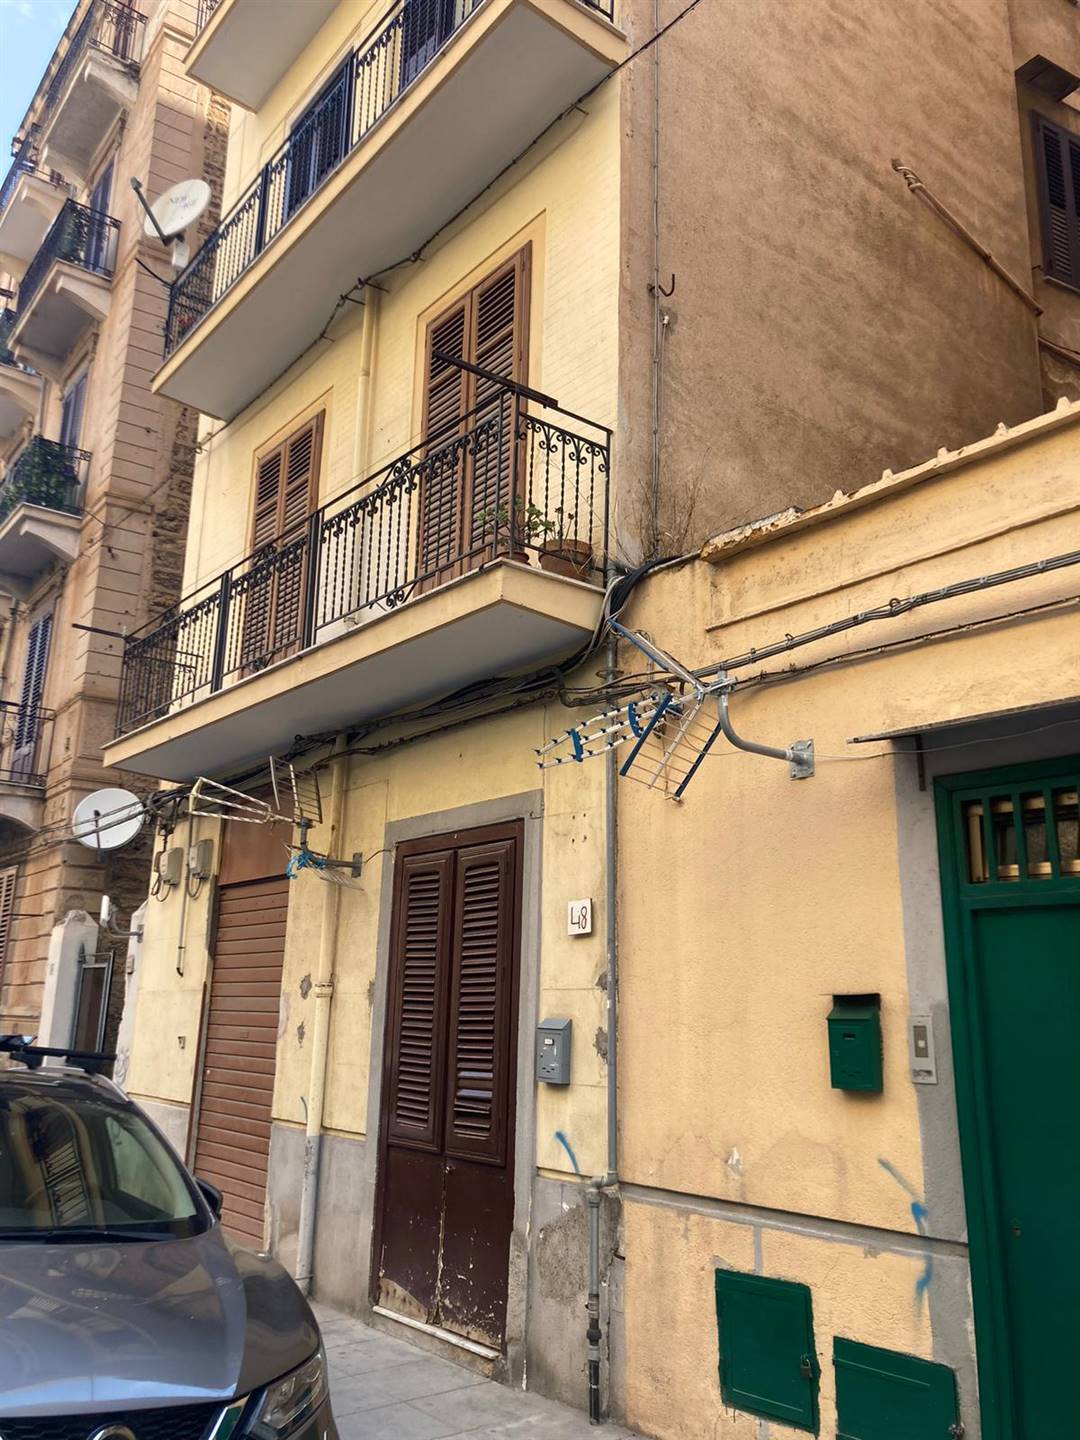 POLICLINICO, PALERMO, Apartment for sale of 25 Sq. mt., Heating Non-existent, Energetic class: G, Epi: 157 kwh/m2 year, placed at Ground, composed 